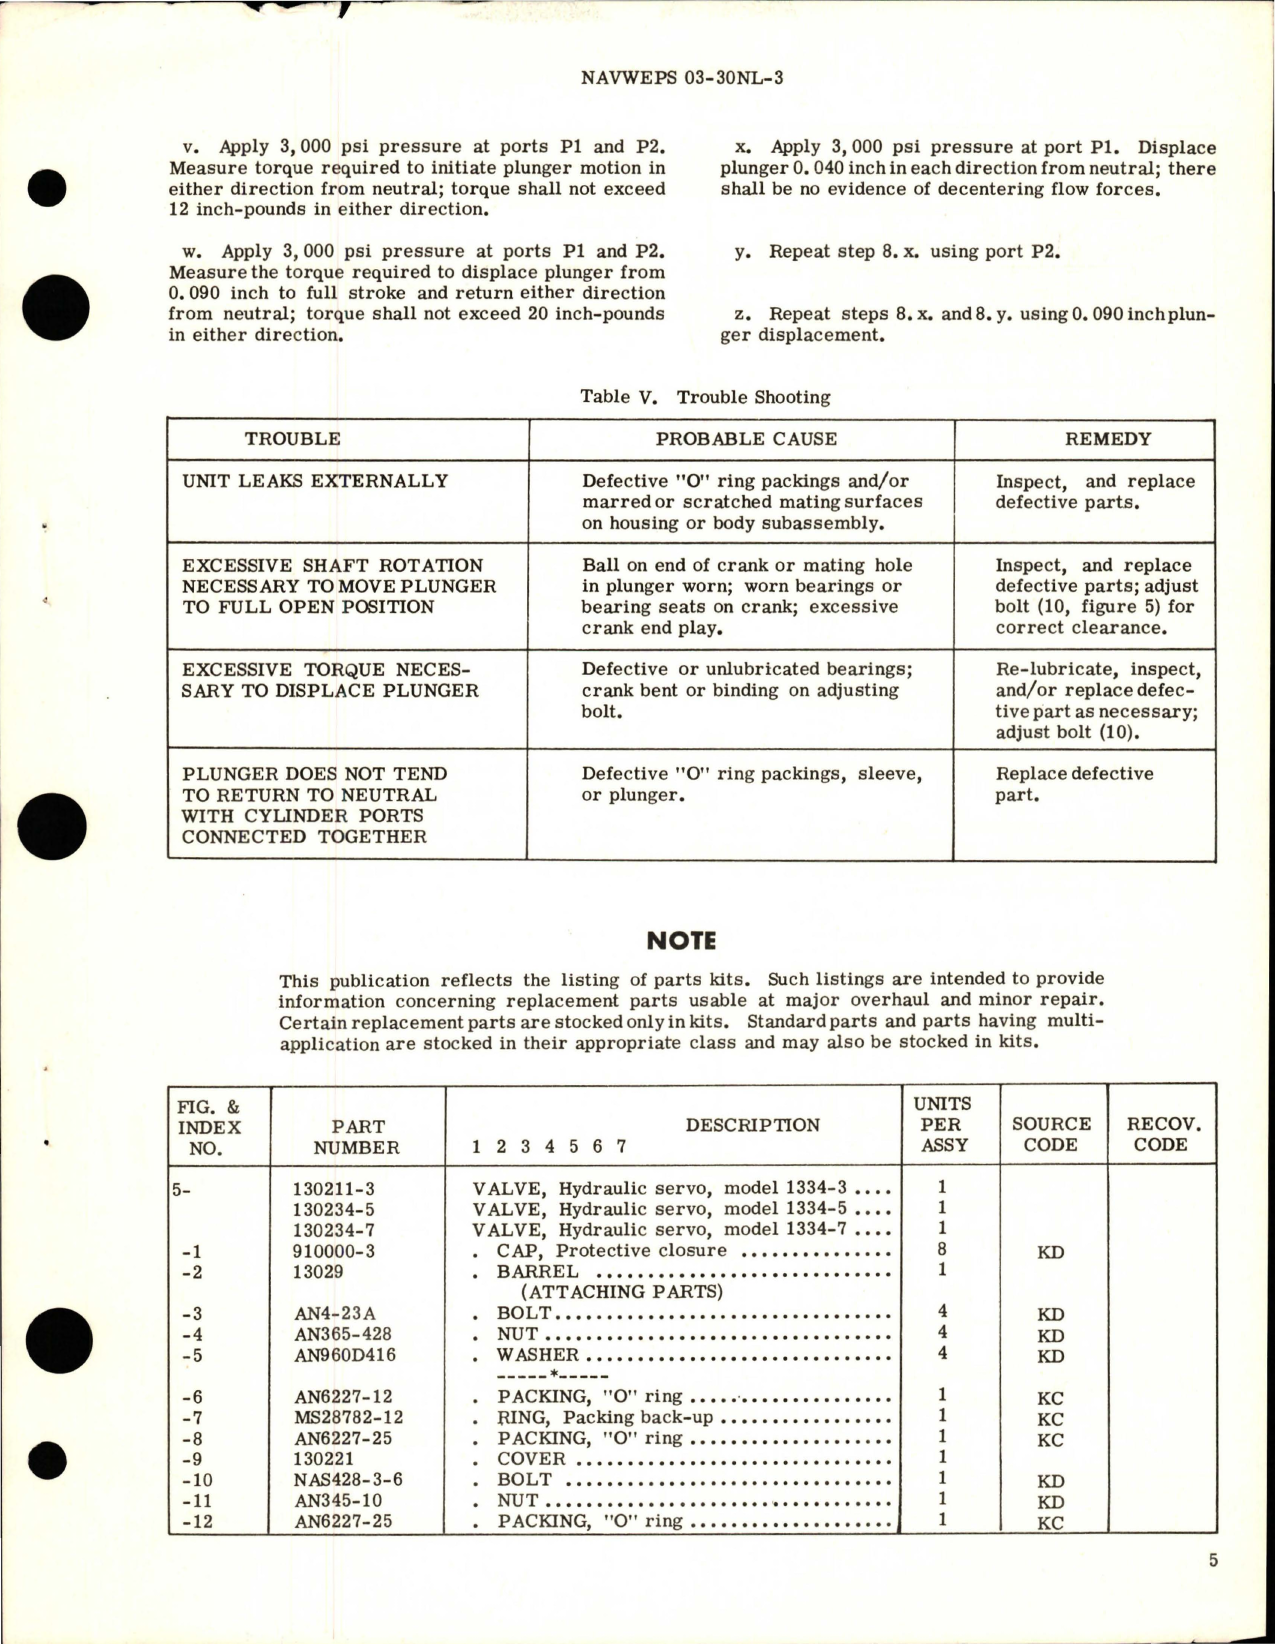 Sample page 5 from AirCorps Library document: Overhaul Instructions with Illustrated Parts for Hydraulic Servo Valve - Parts 130211-3, 130234-5, and 130234-7